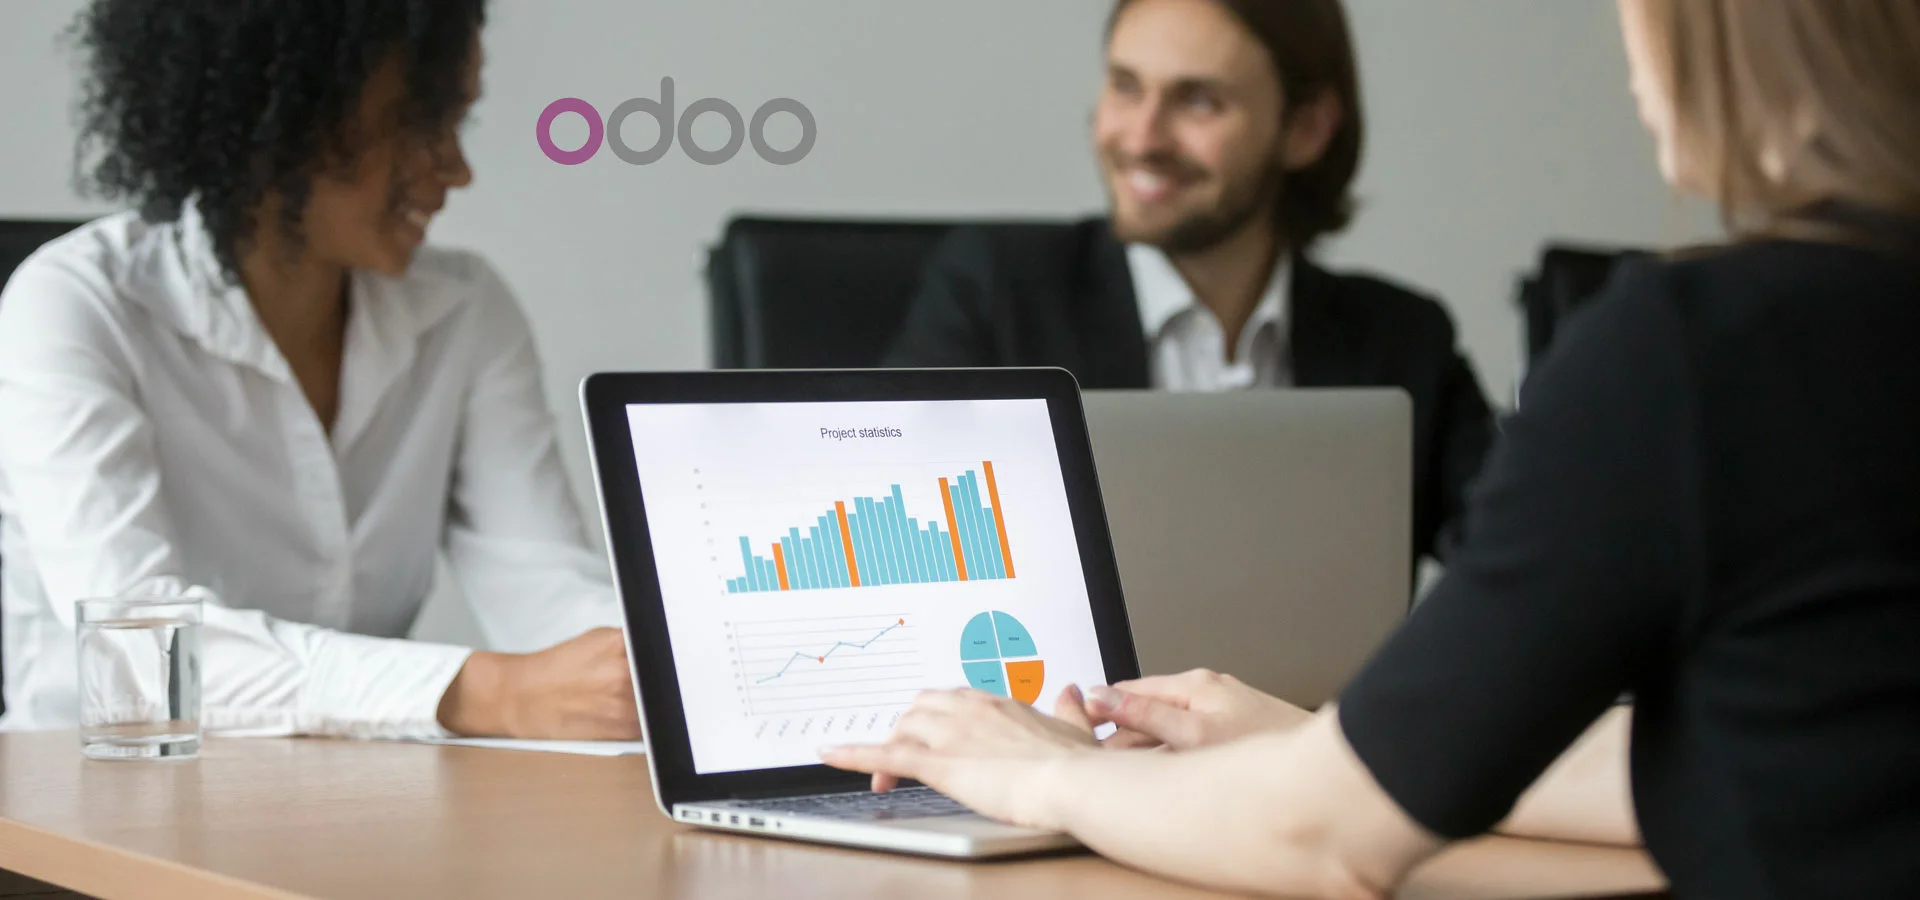 odoo-erp-support-and-services-related-blog-89